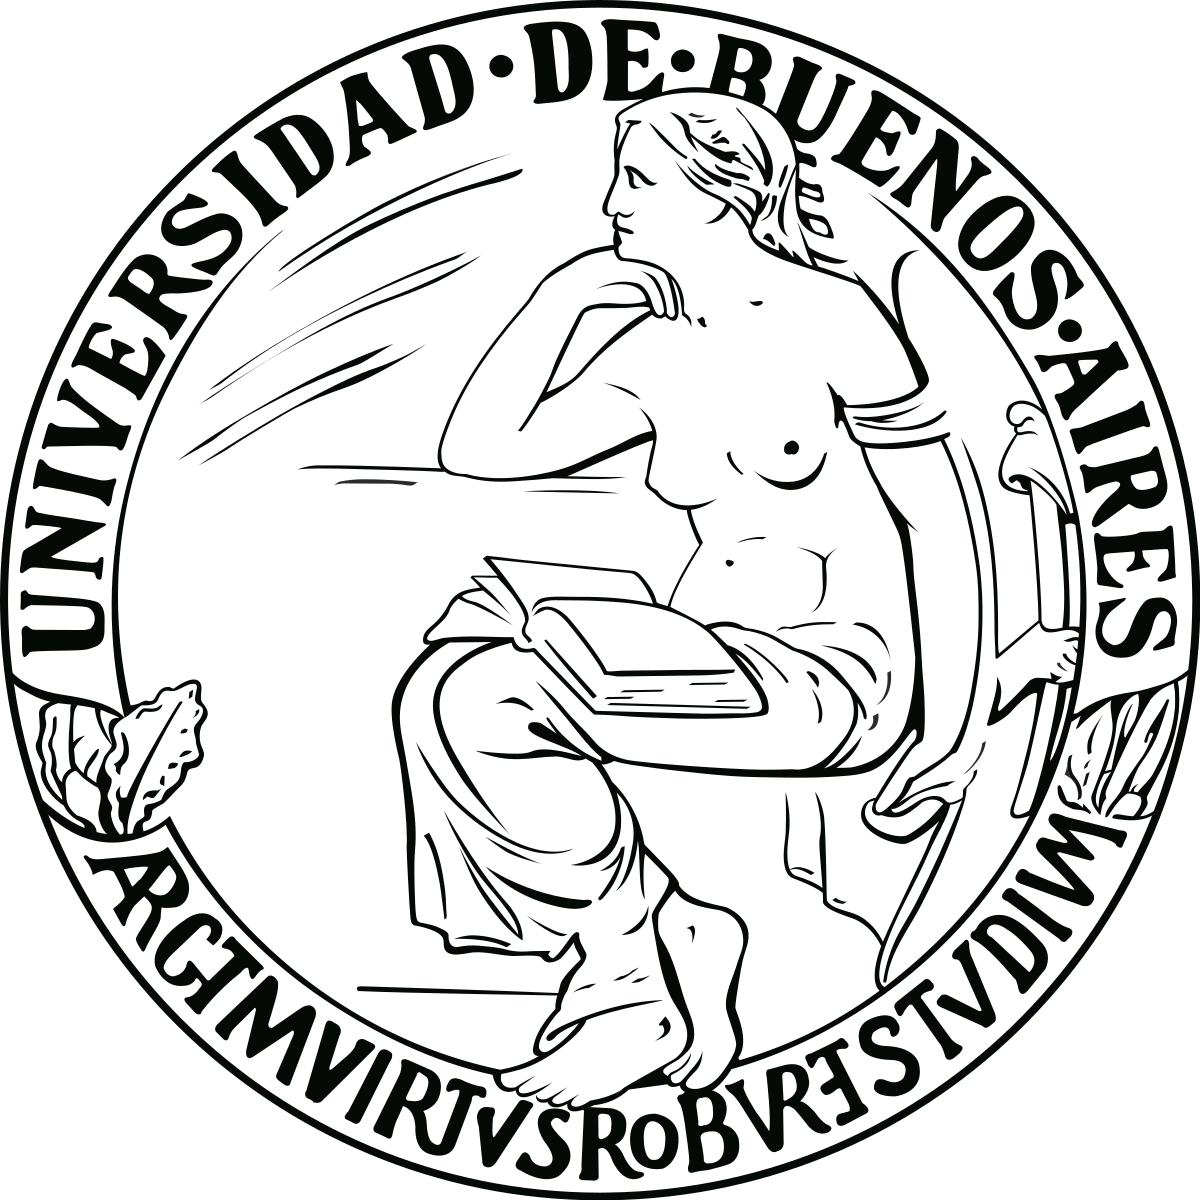 University of Buenos Aires logo